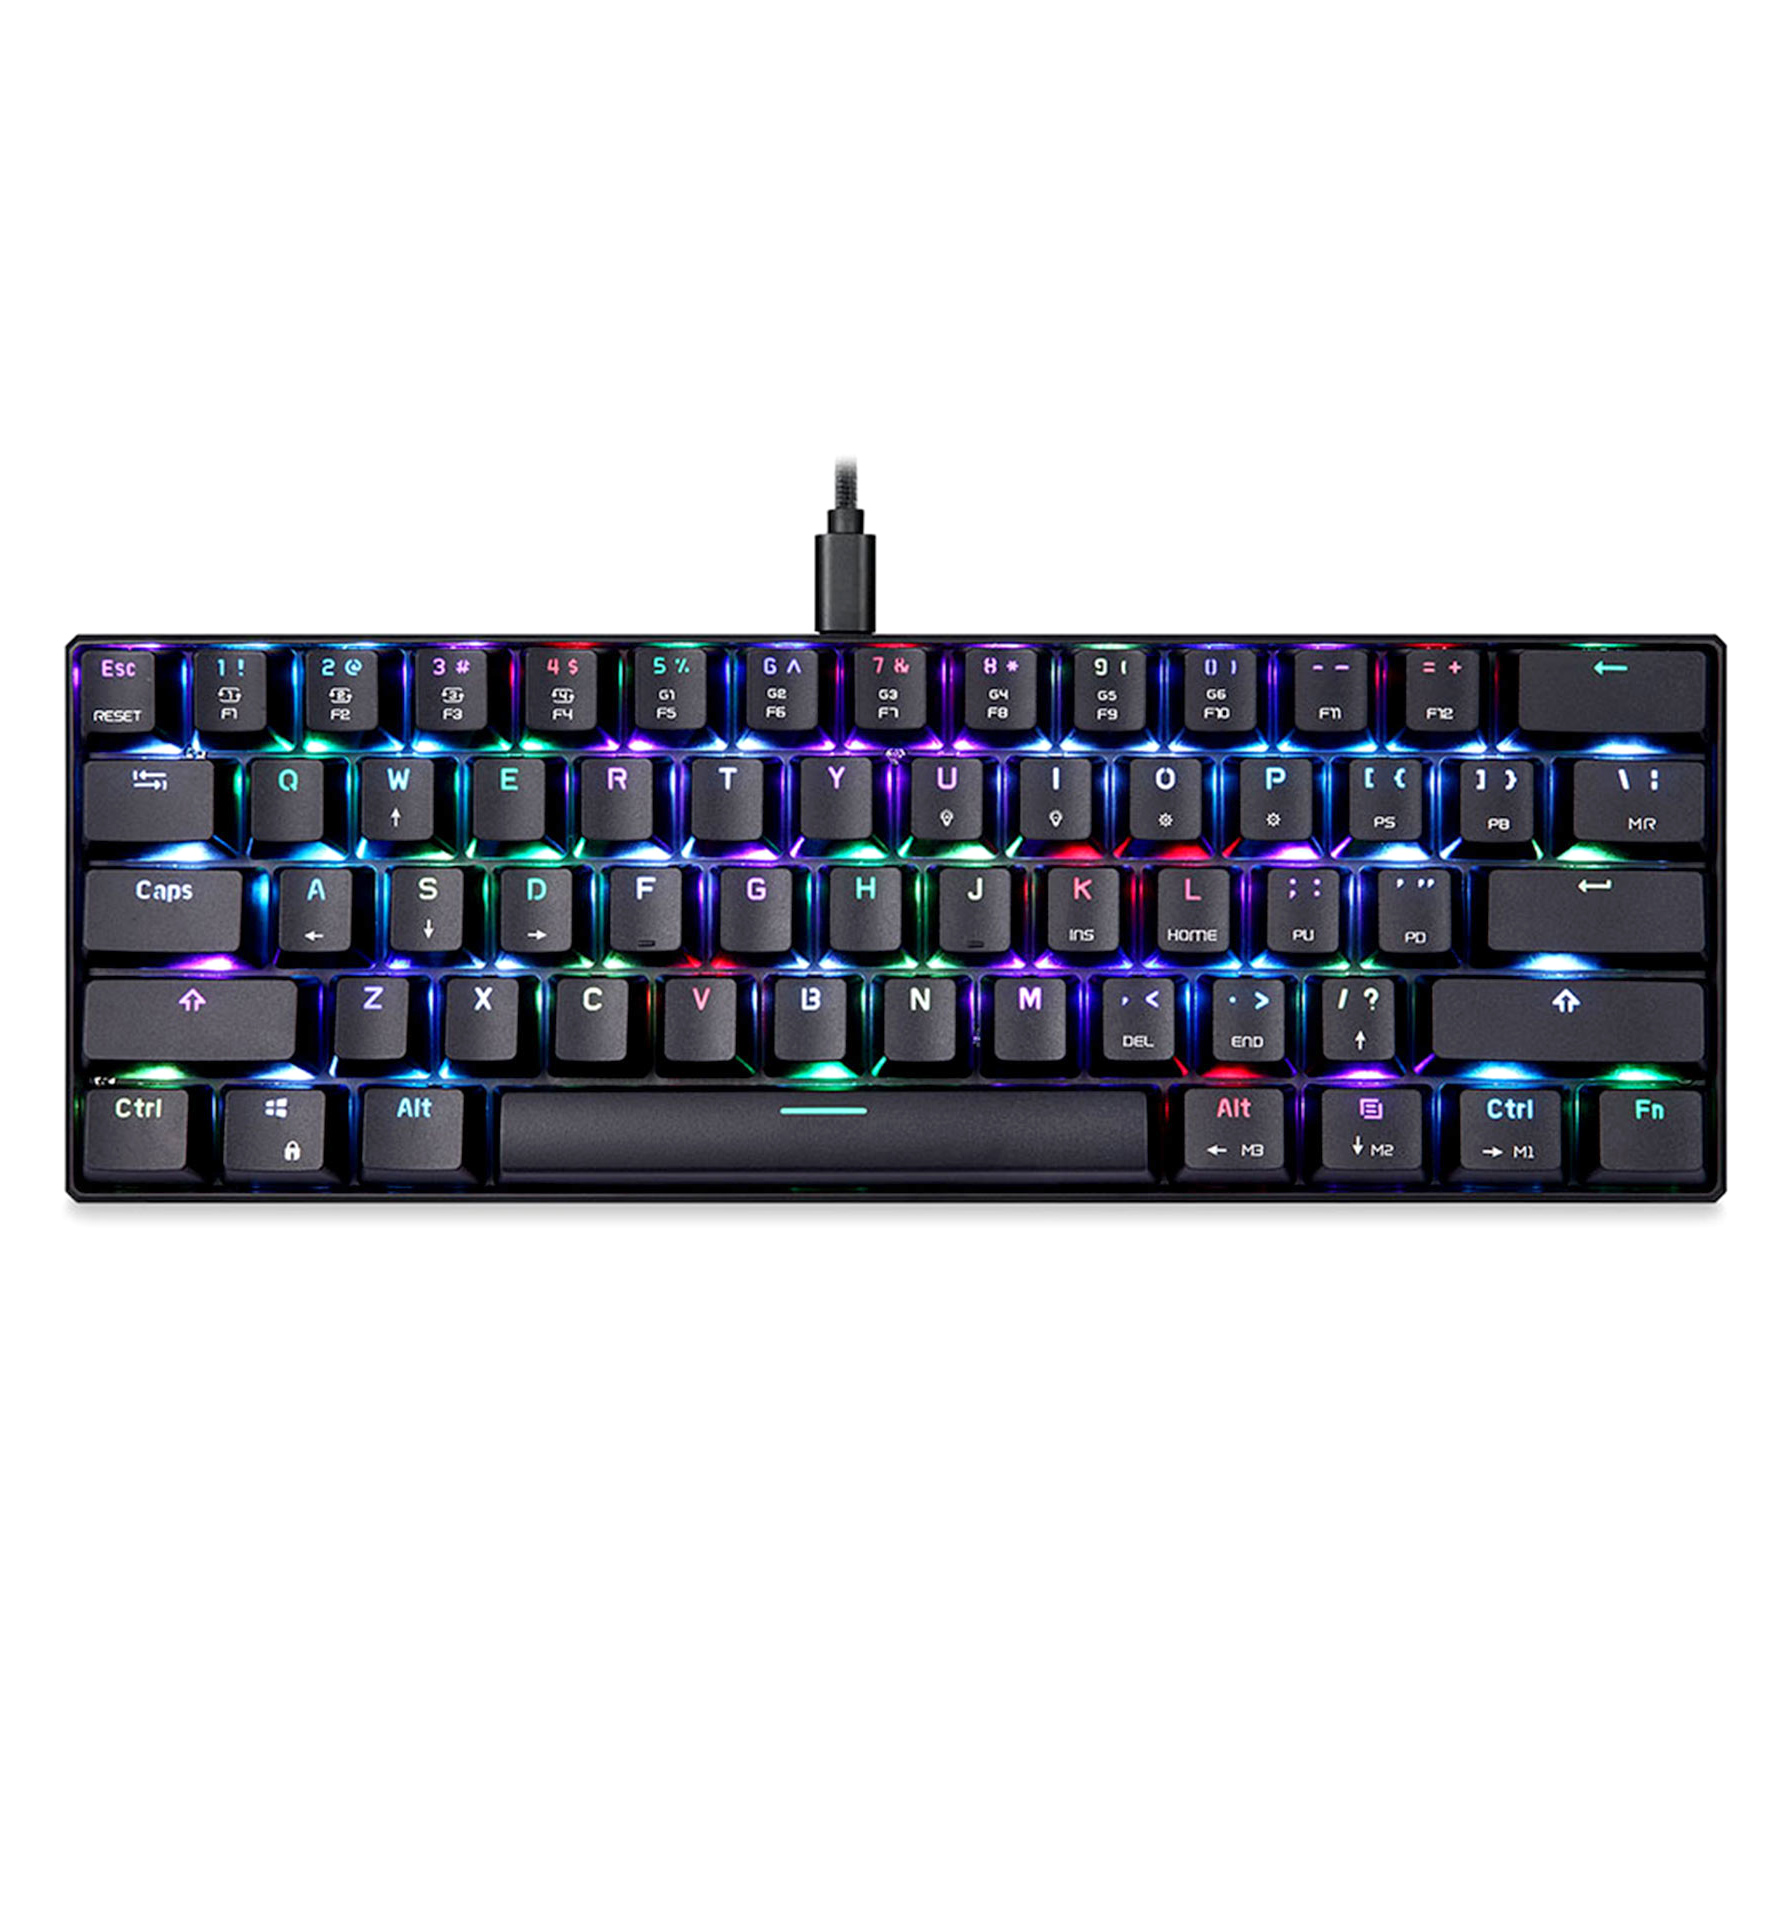 Official MOTOSPEED CK61 NKRO RGB Mechanical Keyboard with Kailh BOX Switch